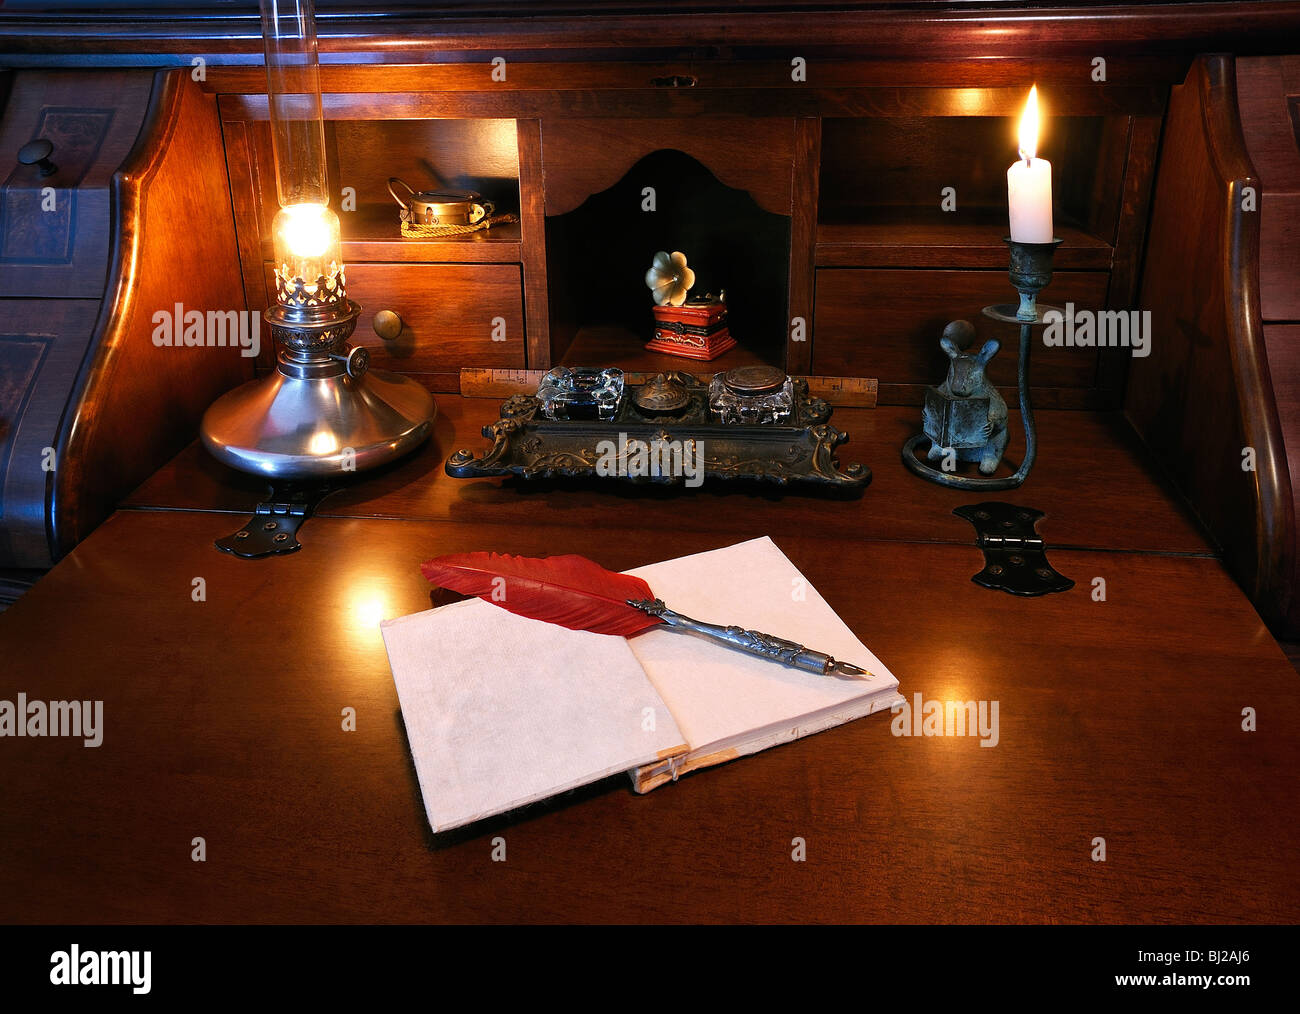 Antique writing desk with red feather quill pen and oil lamp. Ink well in center. Stock Photo